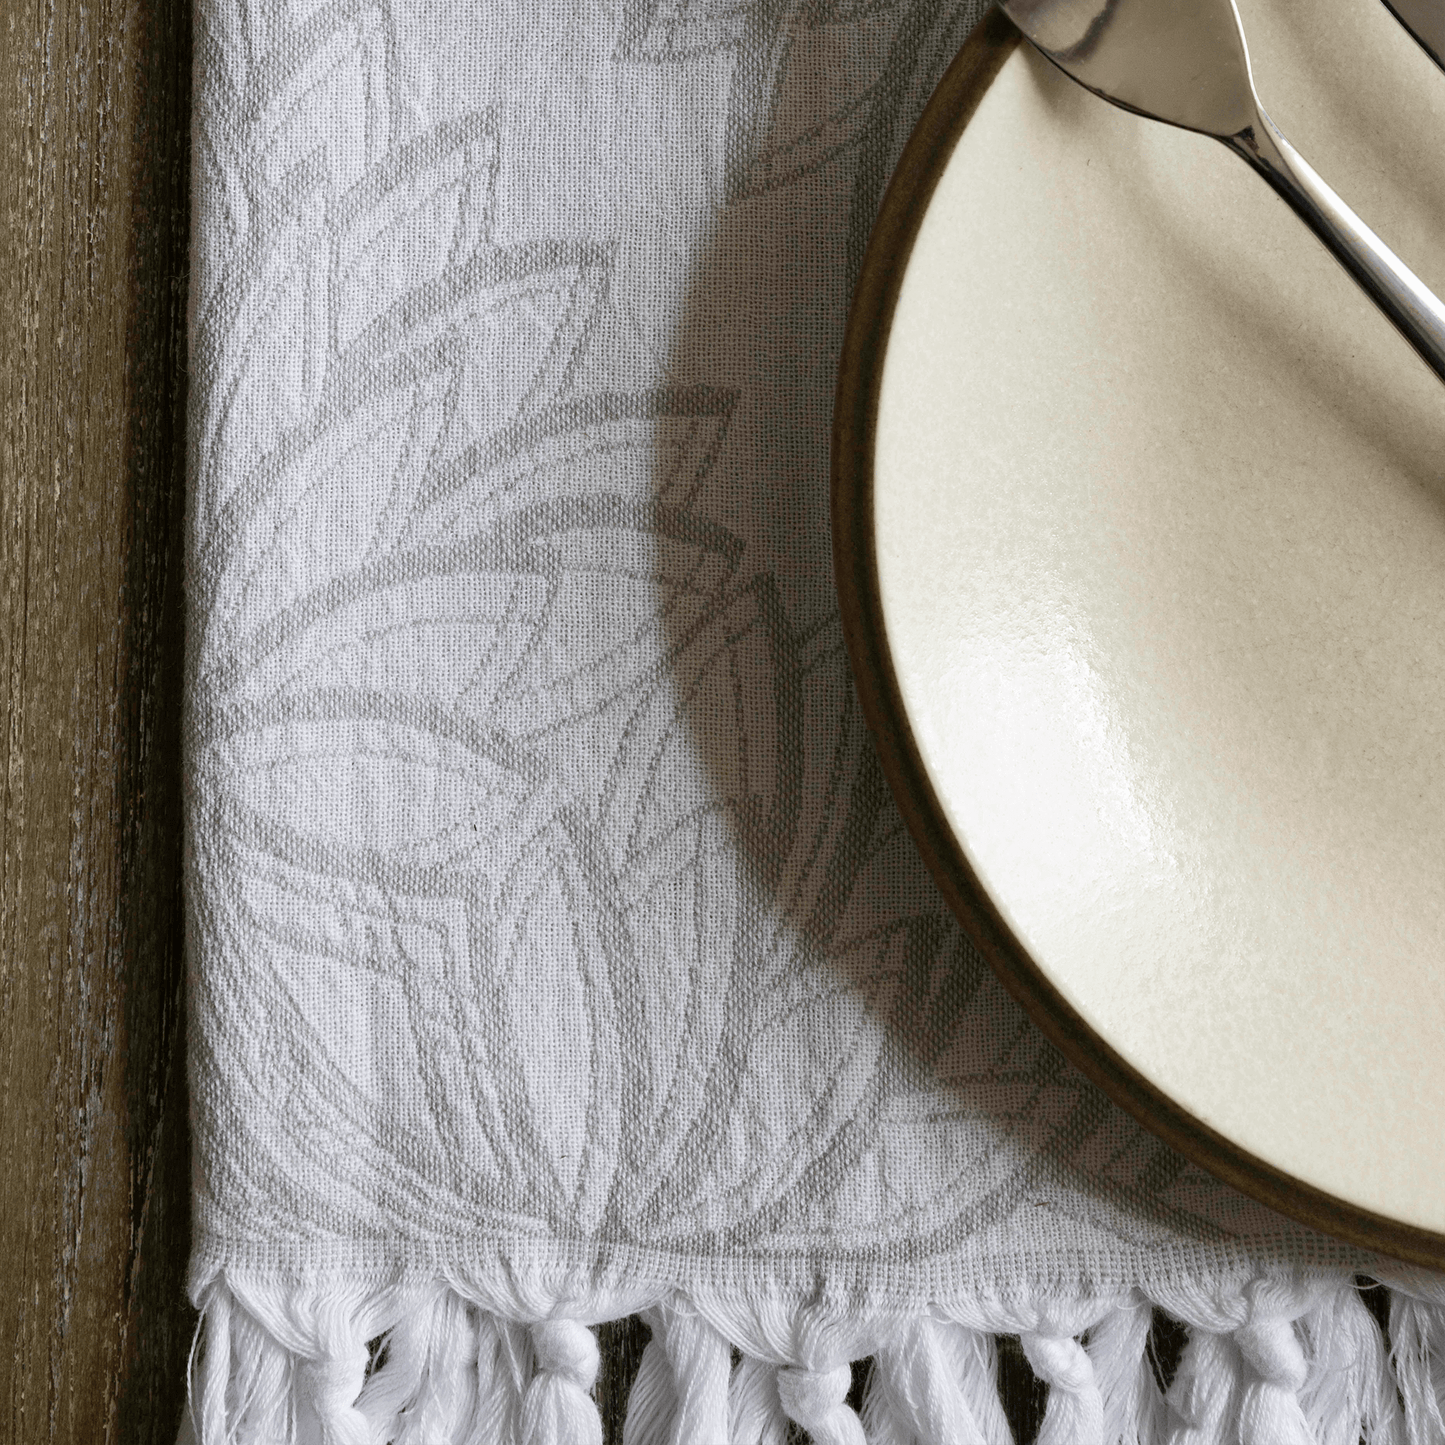 Grey and white Turkish hand towel with plate as a hand towel